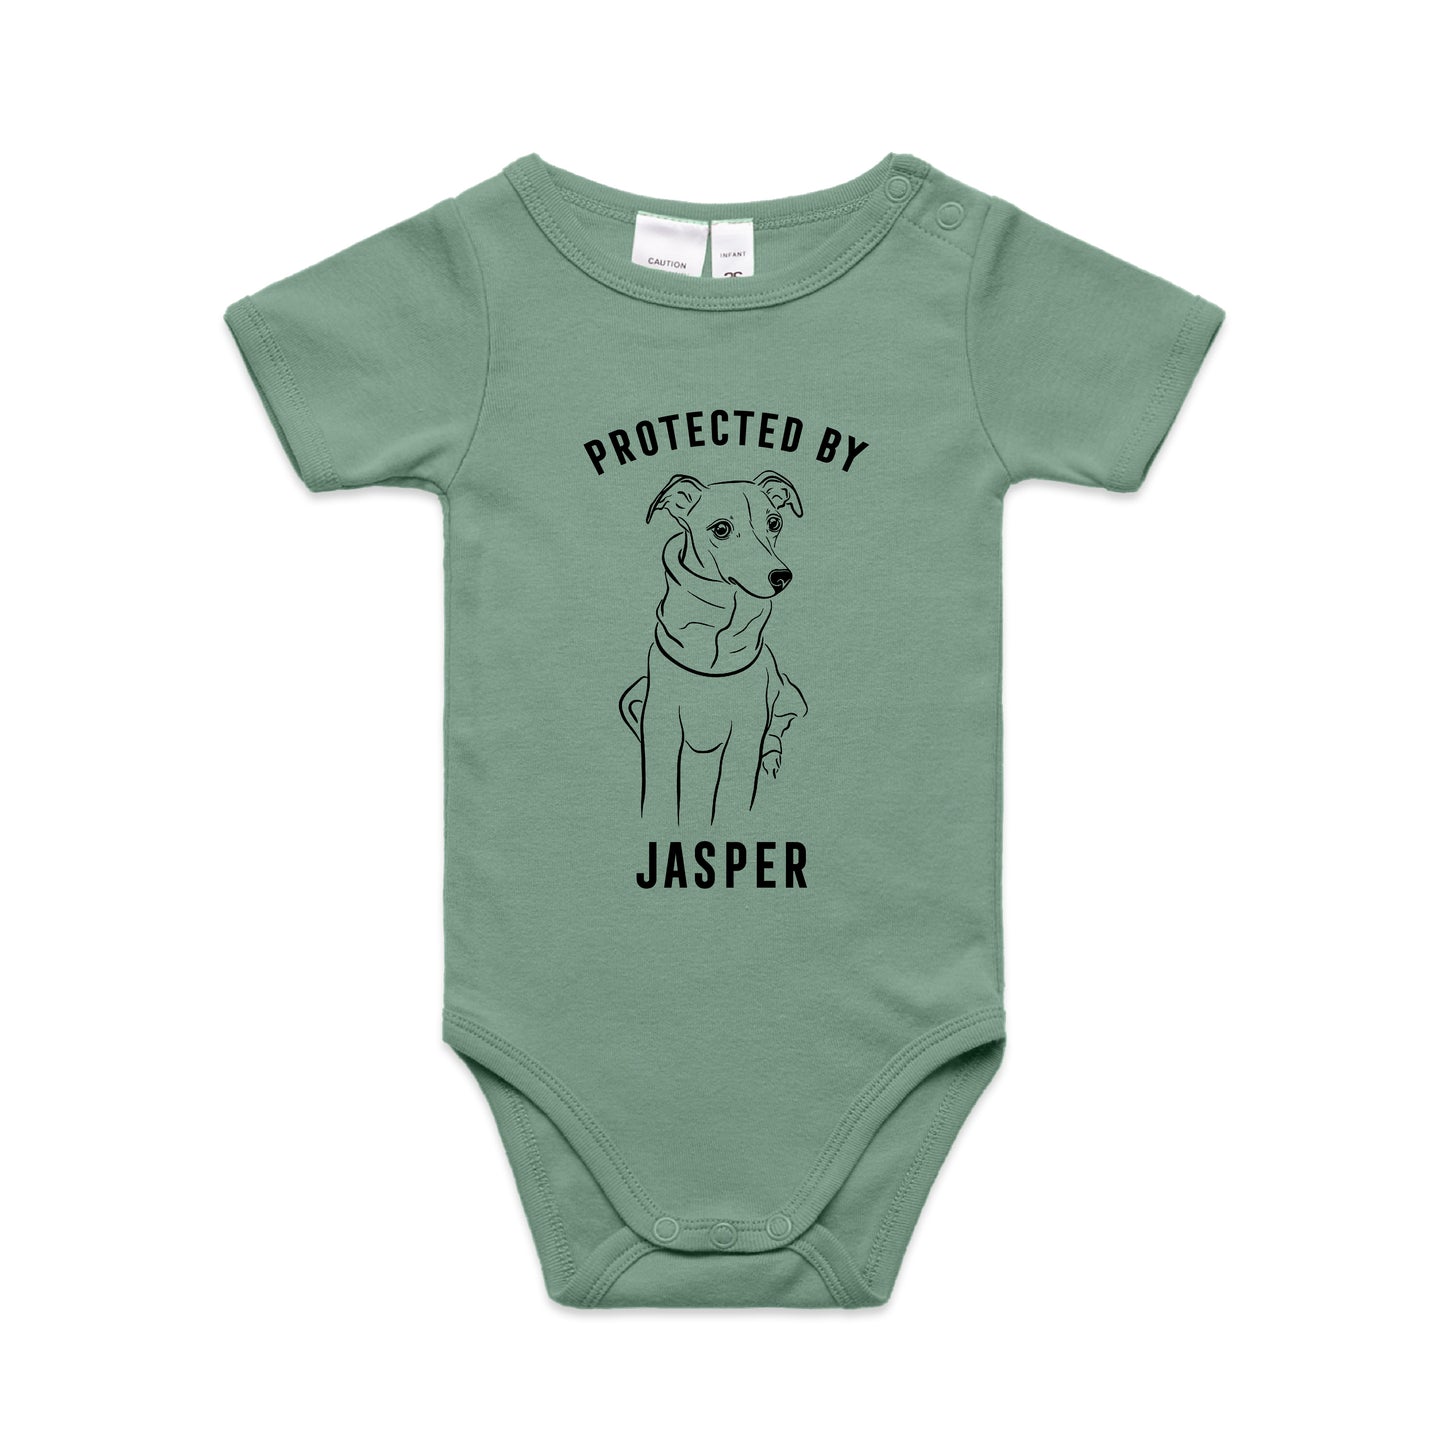 "Protected By" Baby Onesie